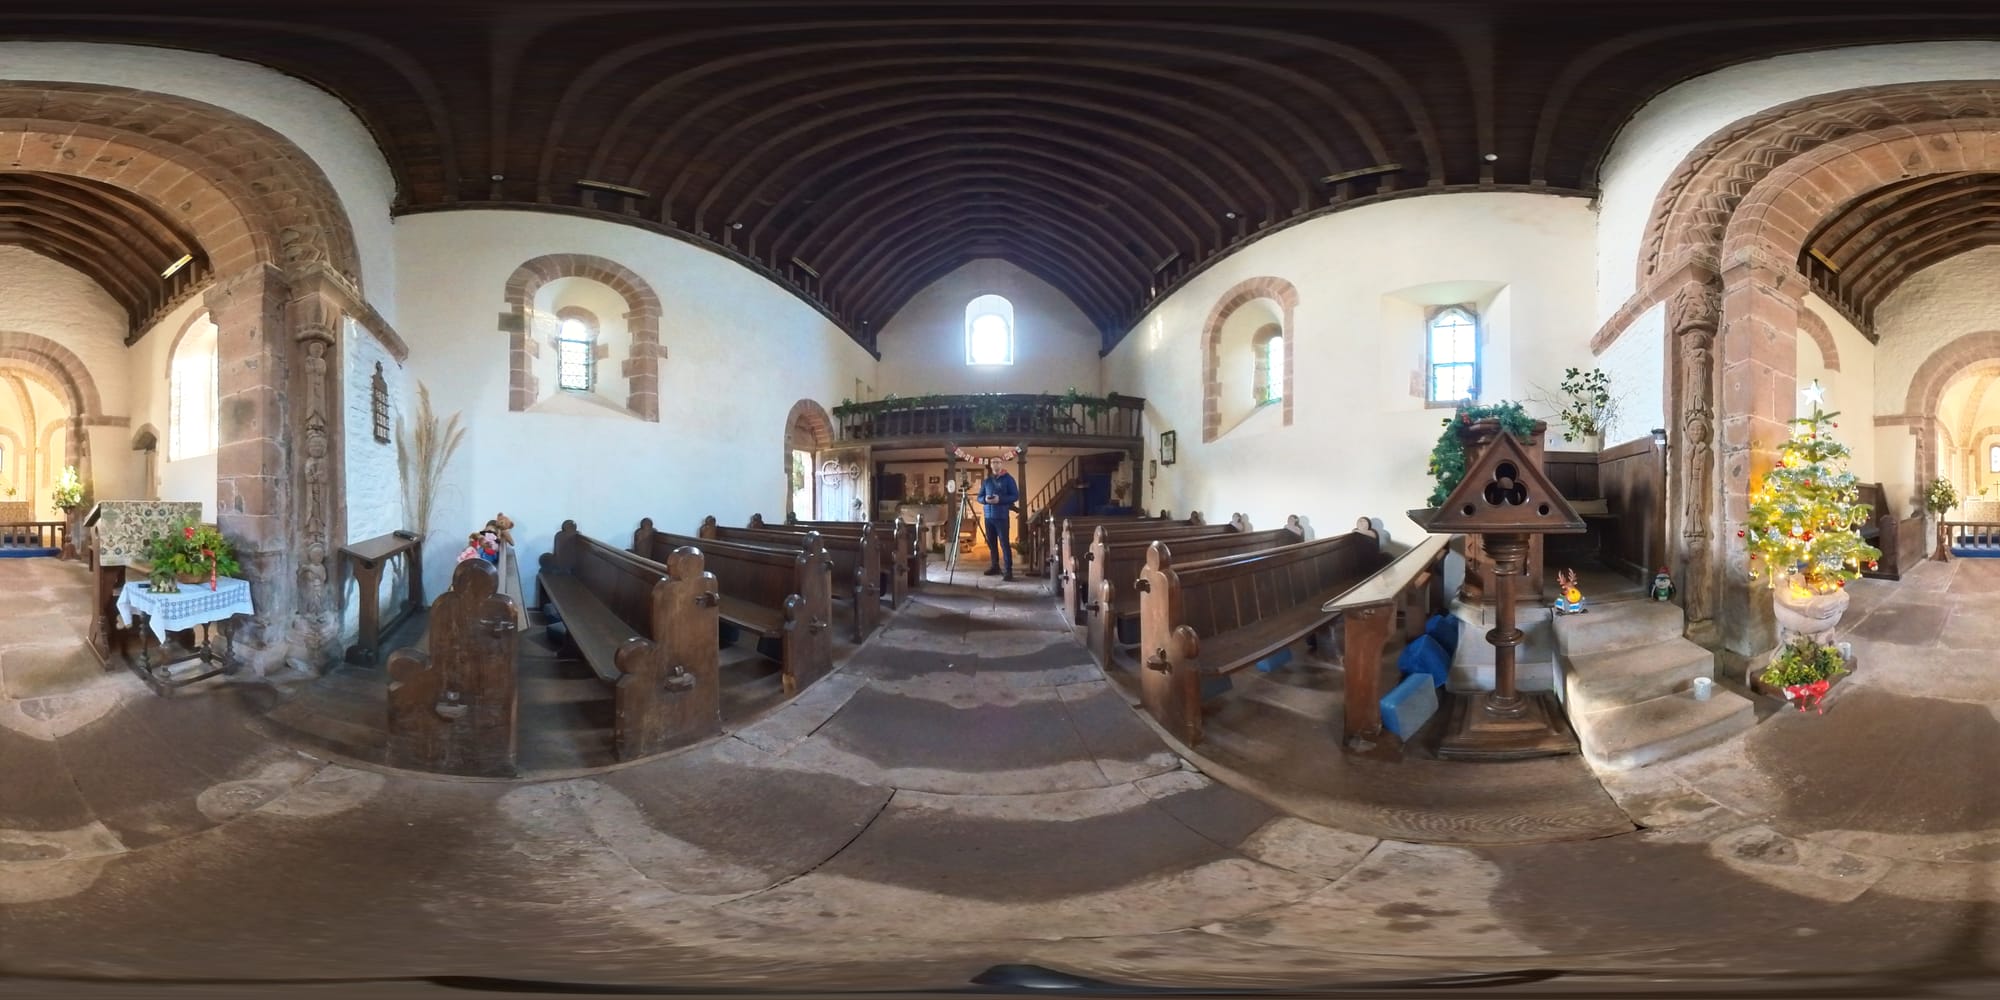 Be there: Kilpeck interior, Herefordshire in glorious VR